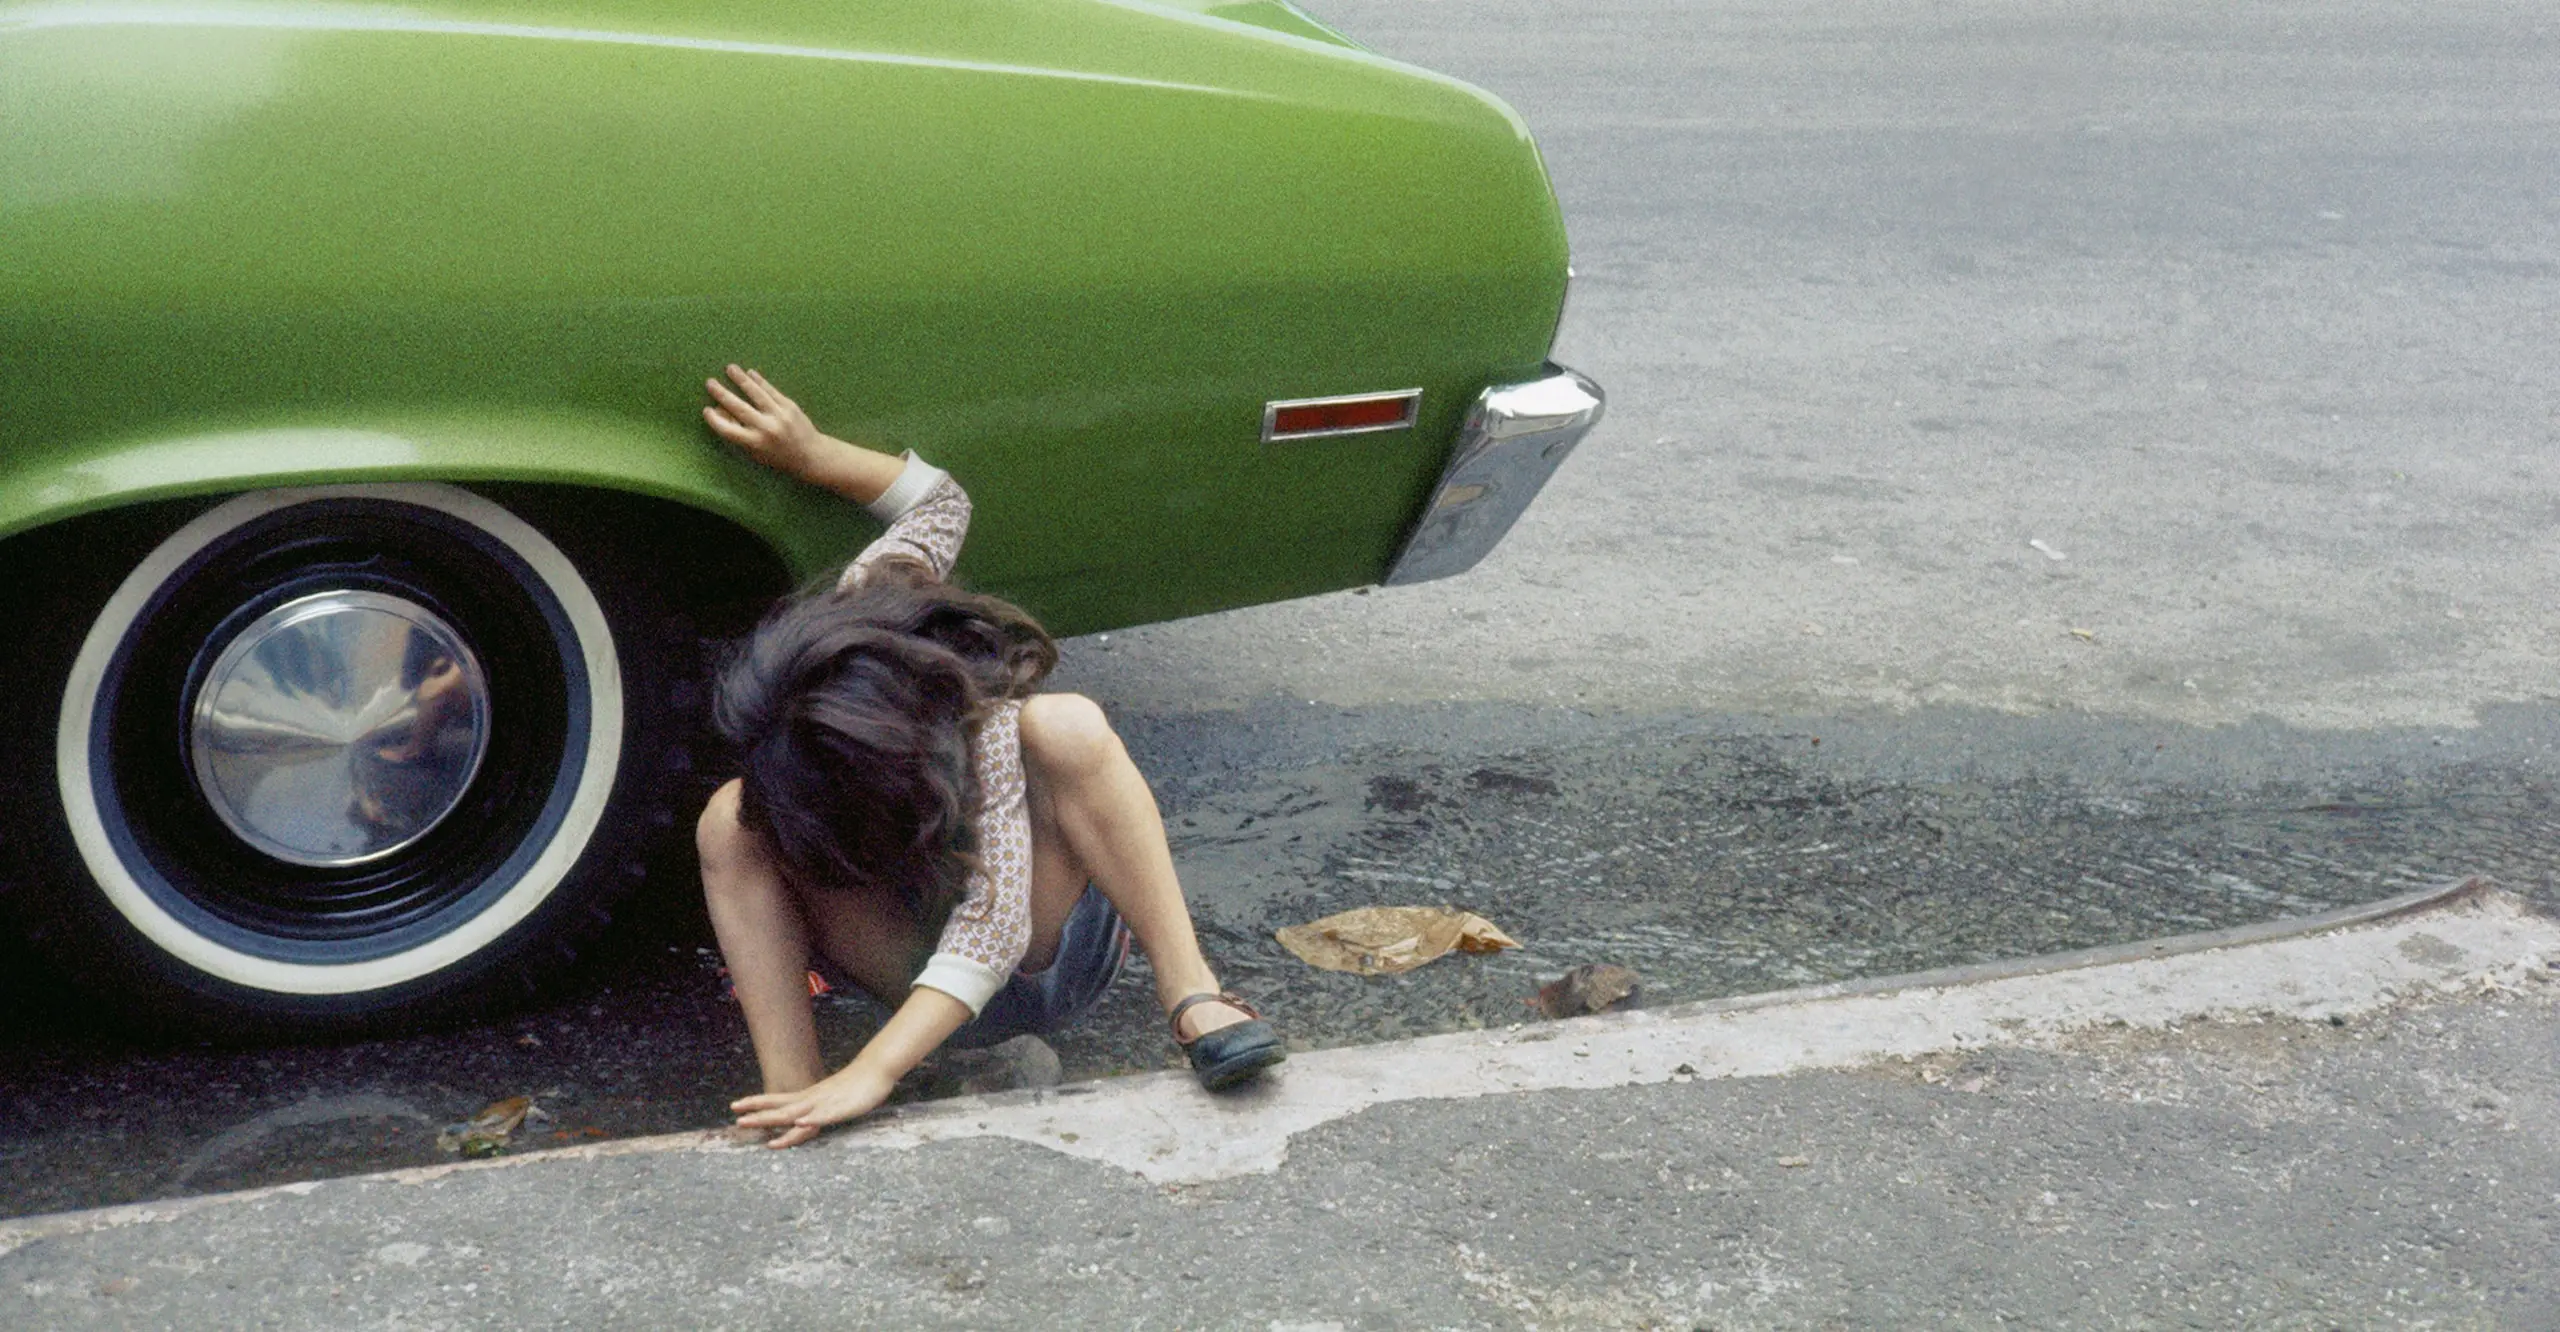 A child crouches on the pavement next to the back tyre of a green car